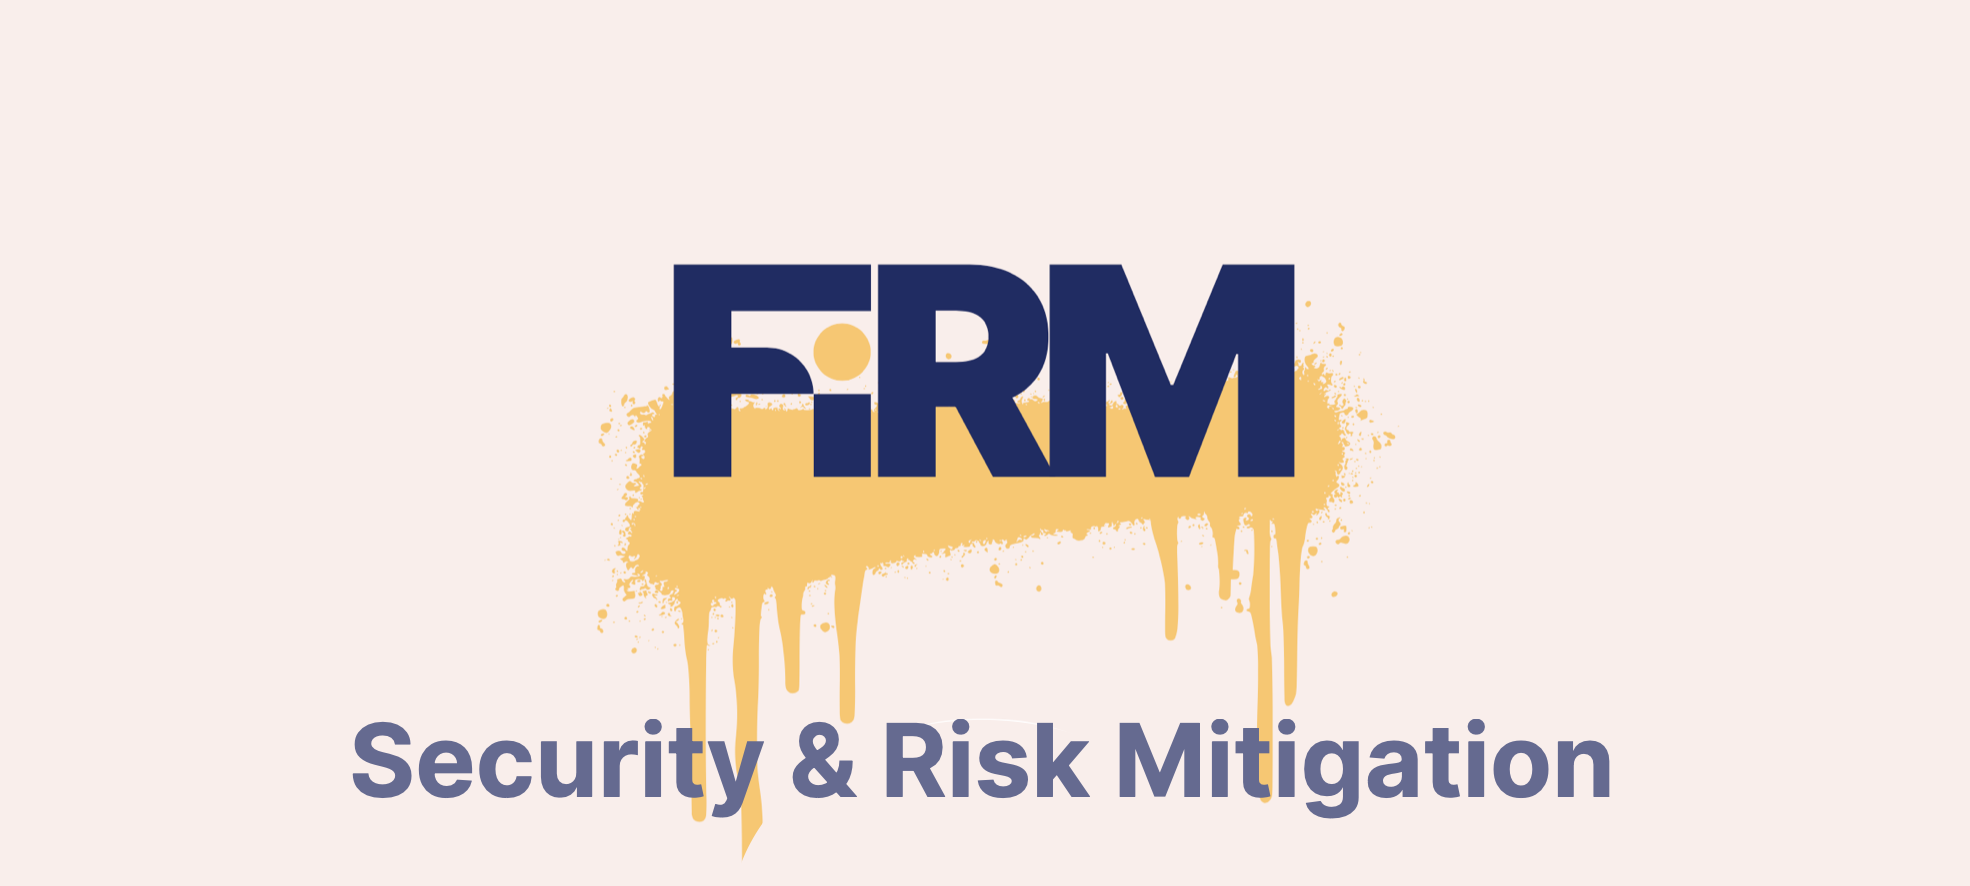 Cover Image for Prioritizing Safety with FiRM: Introducing Our Latest Security Features